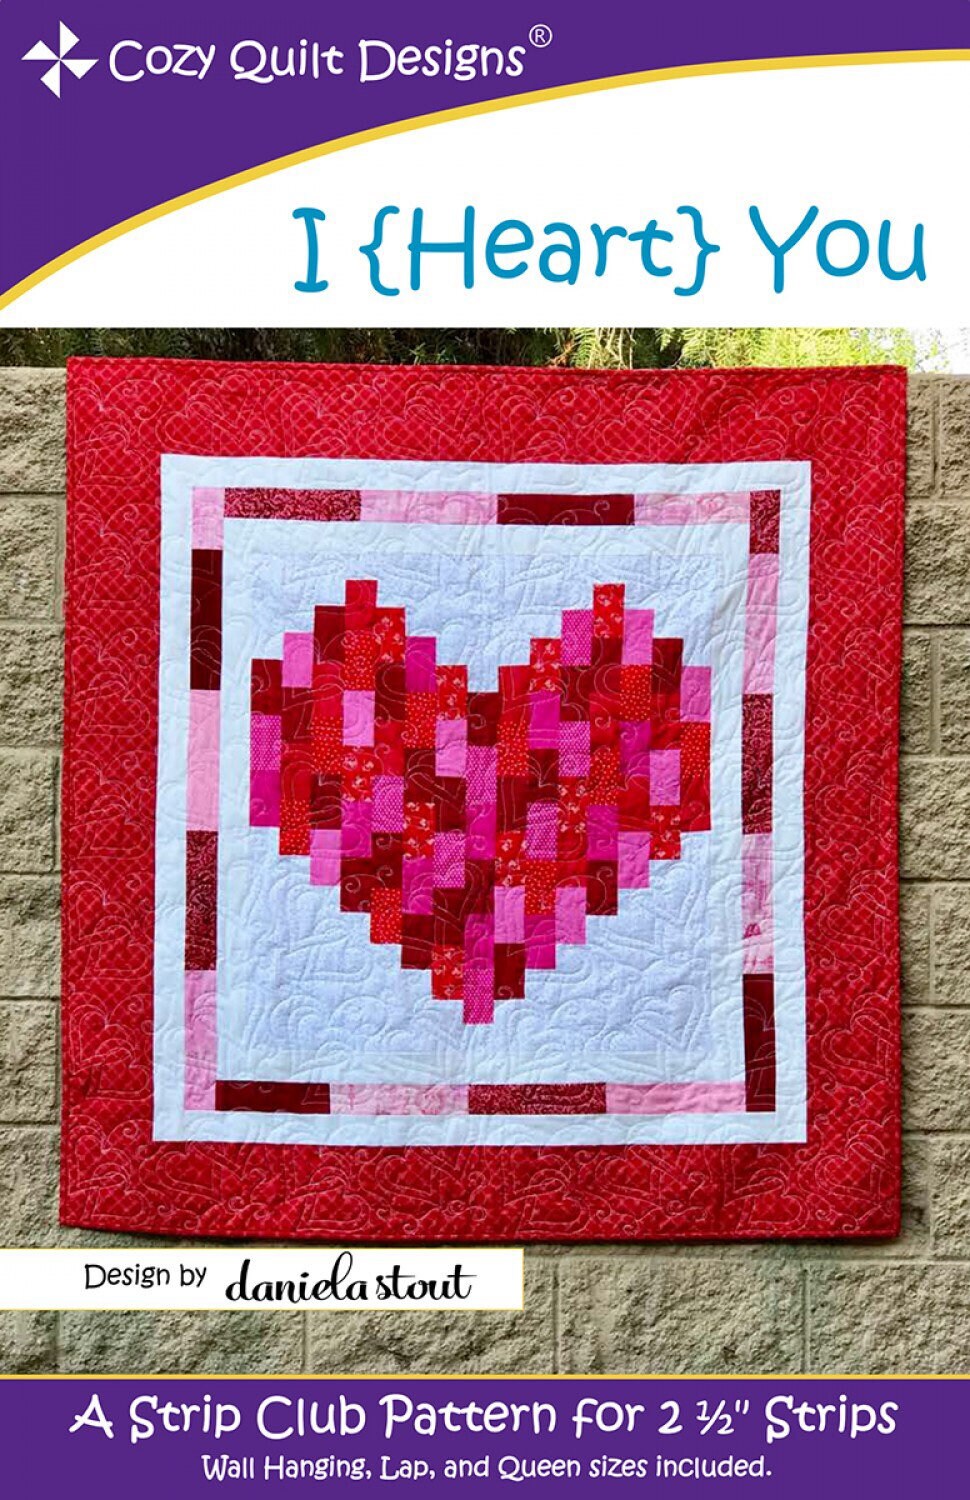 I Heart You Quilt Pattern - Cozy Quilt Designs - Daniela Stout - Heart Quilt Pattern - Valentines Day Quilt Pattern - Jelly Roll Friendly